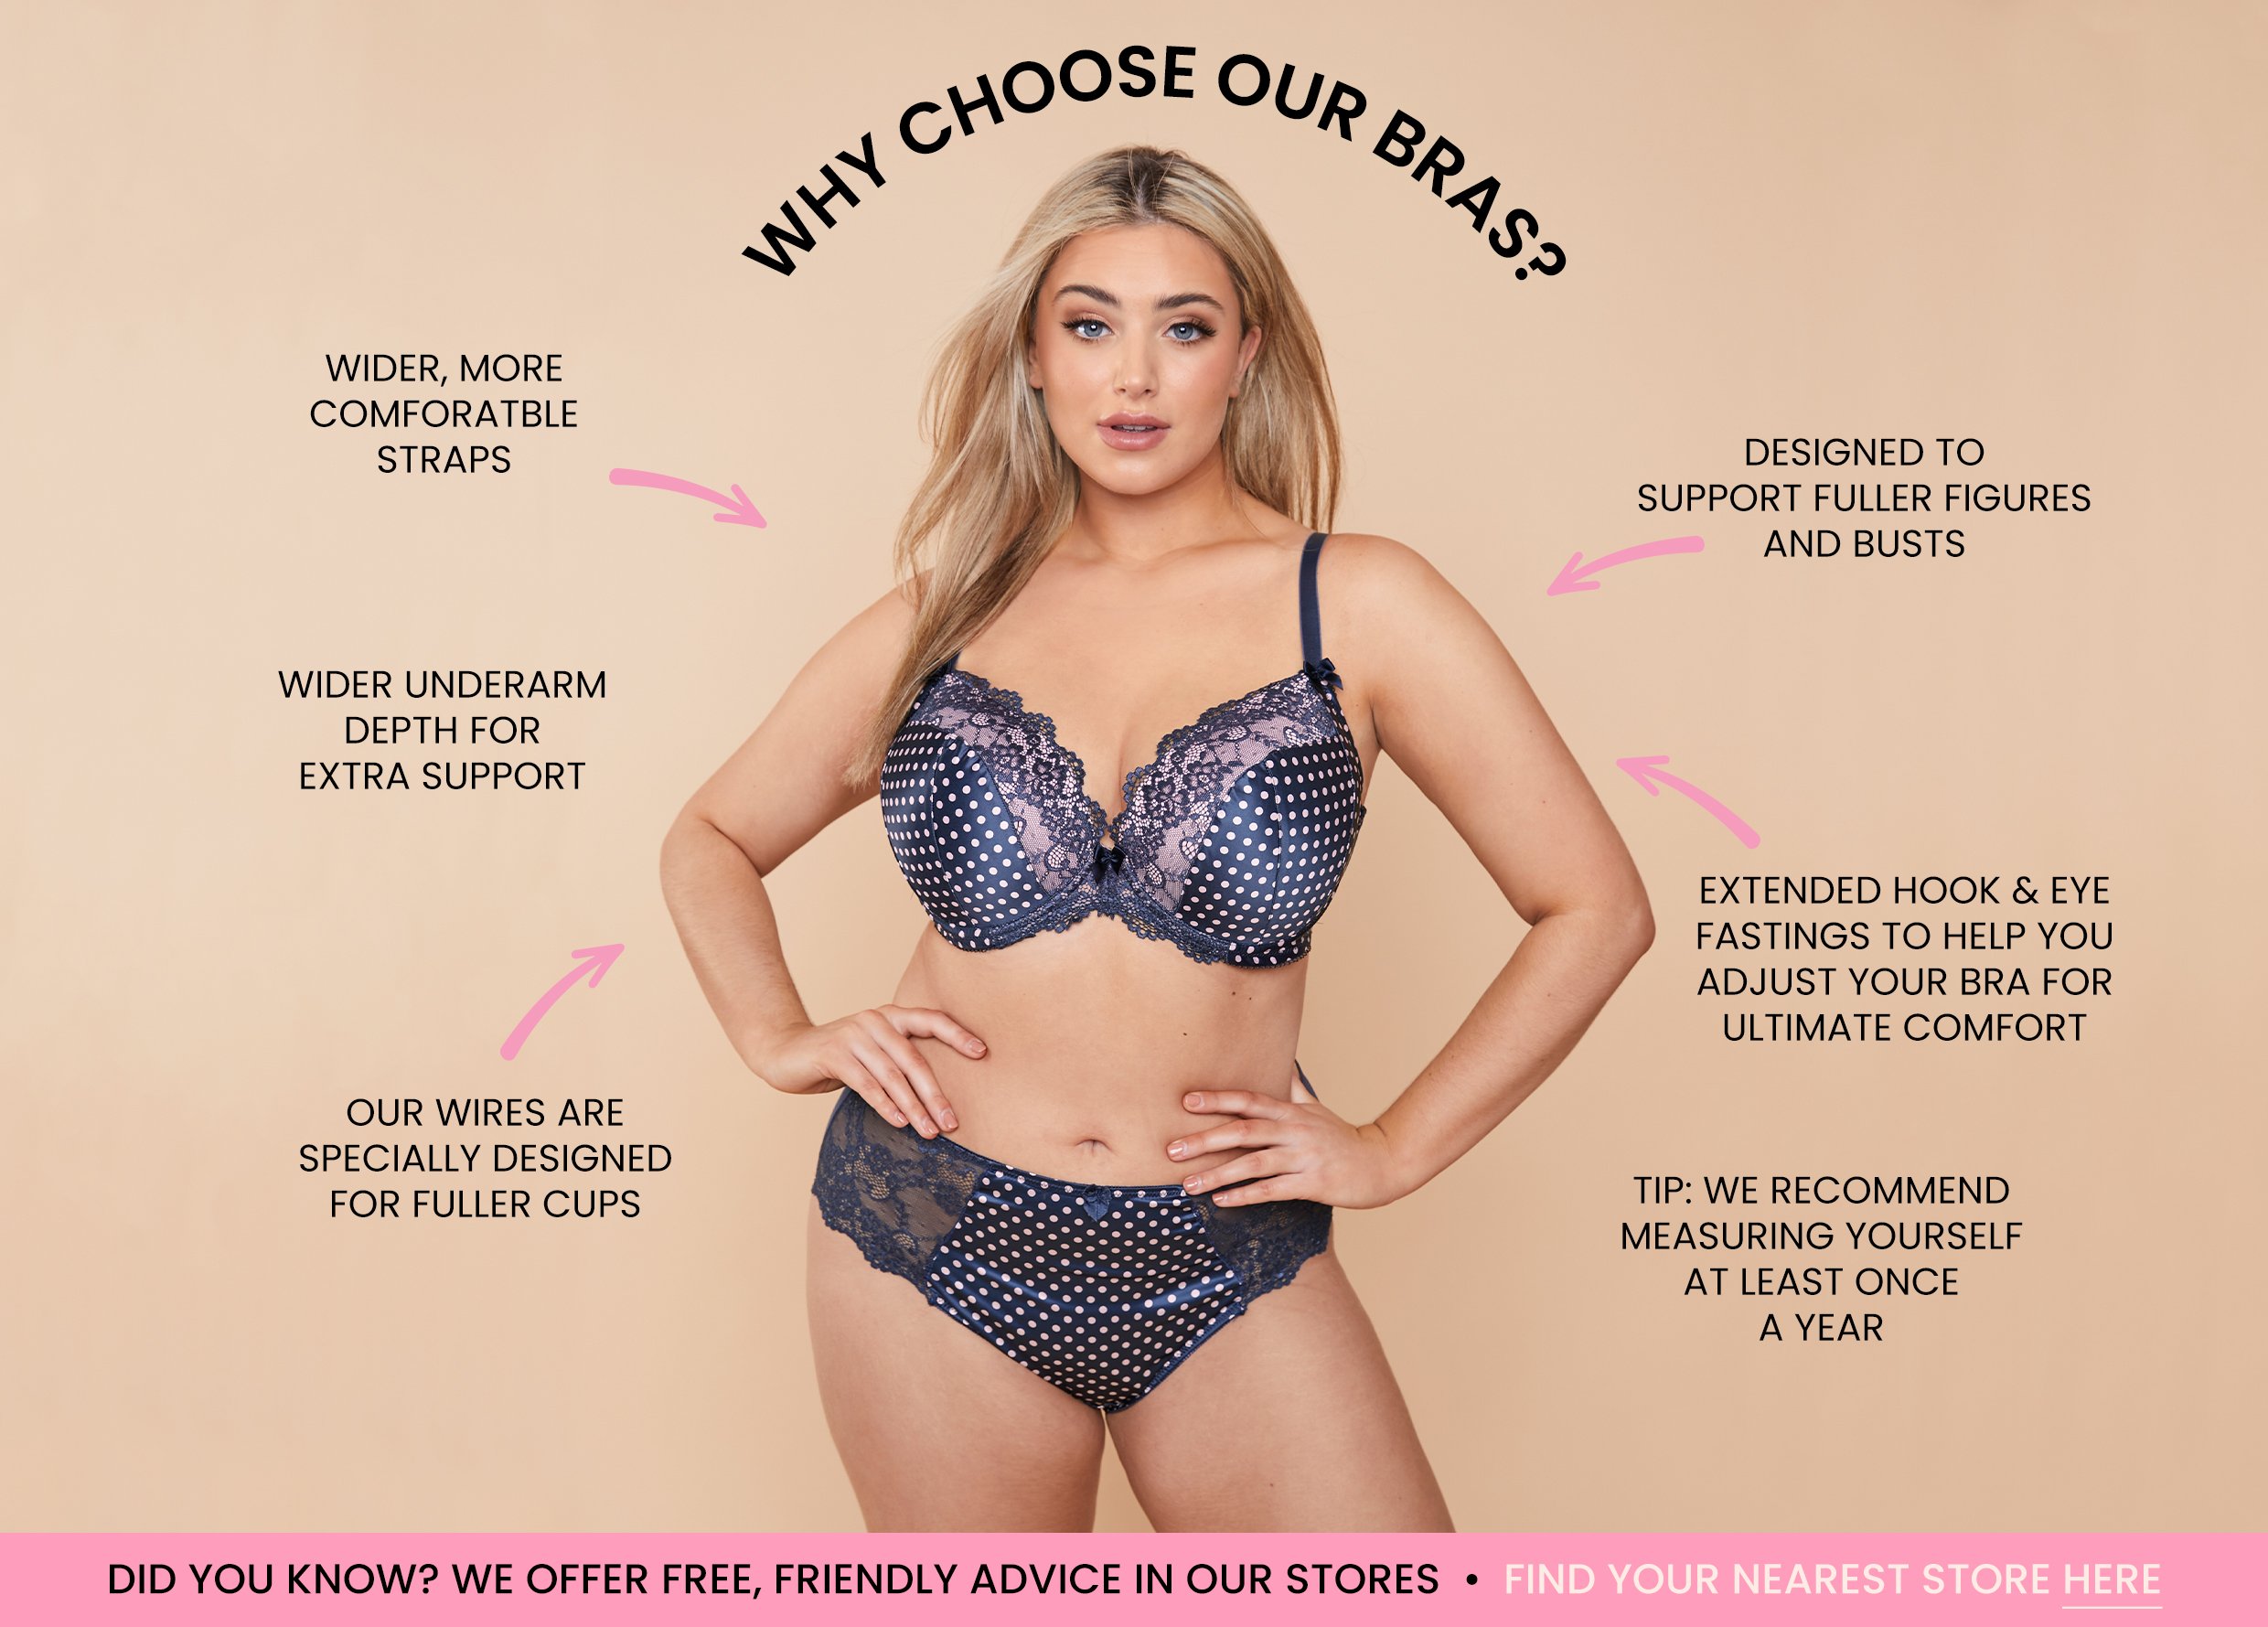 What is the difference between American and UK bra sizing? - Quora